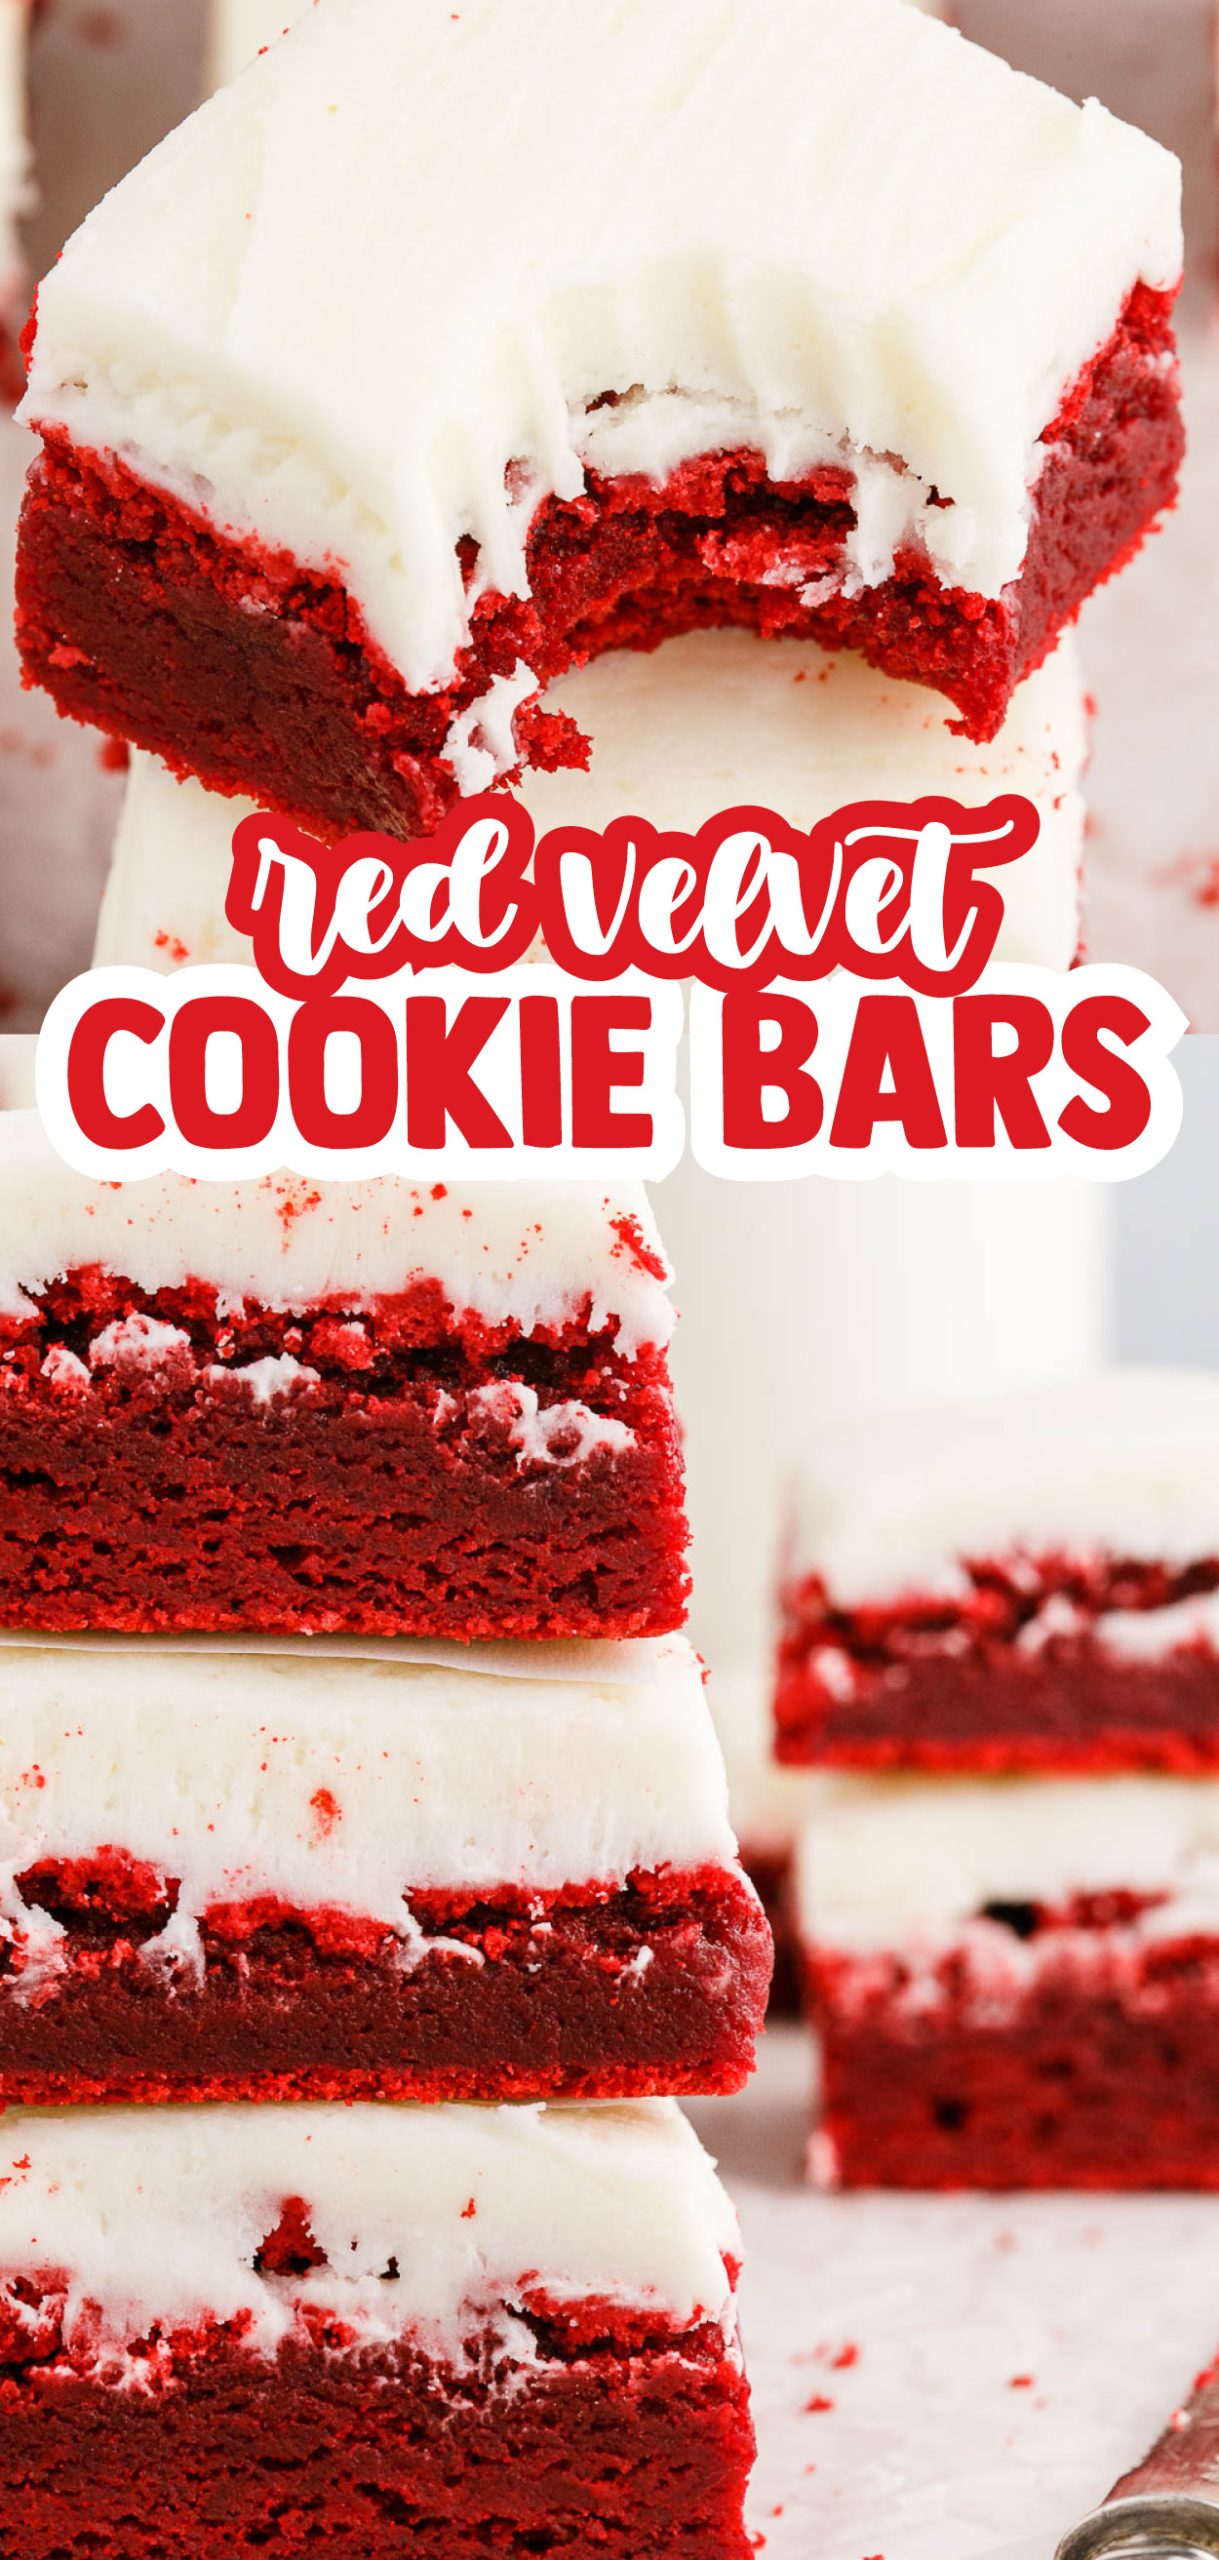 These red velvet cookie bars have a light crunchy outside with a soft and chewy inside making them the perfect balance! They make a great treat to eat on their own or add an extra layer of depth with this cream cheese icing. 